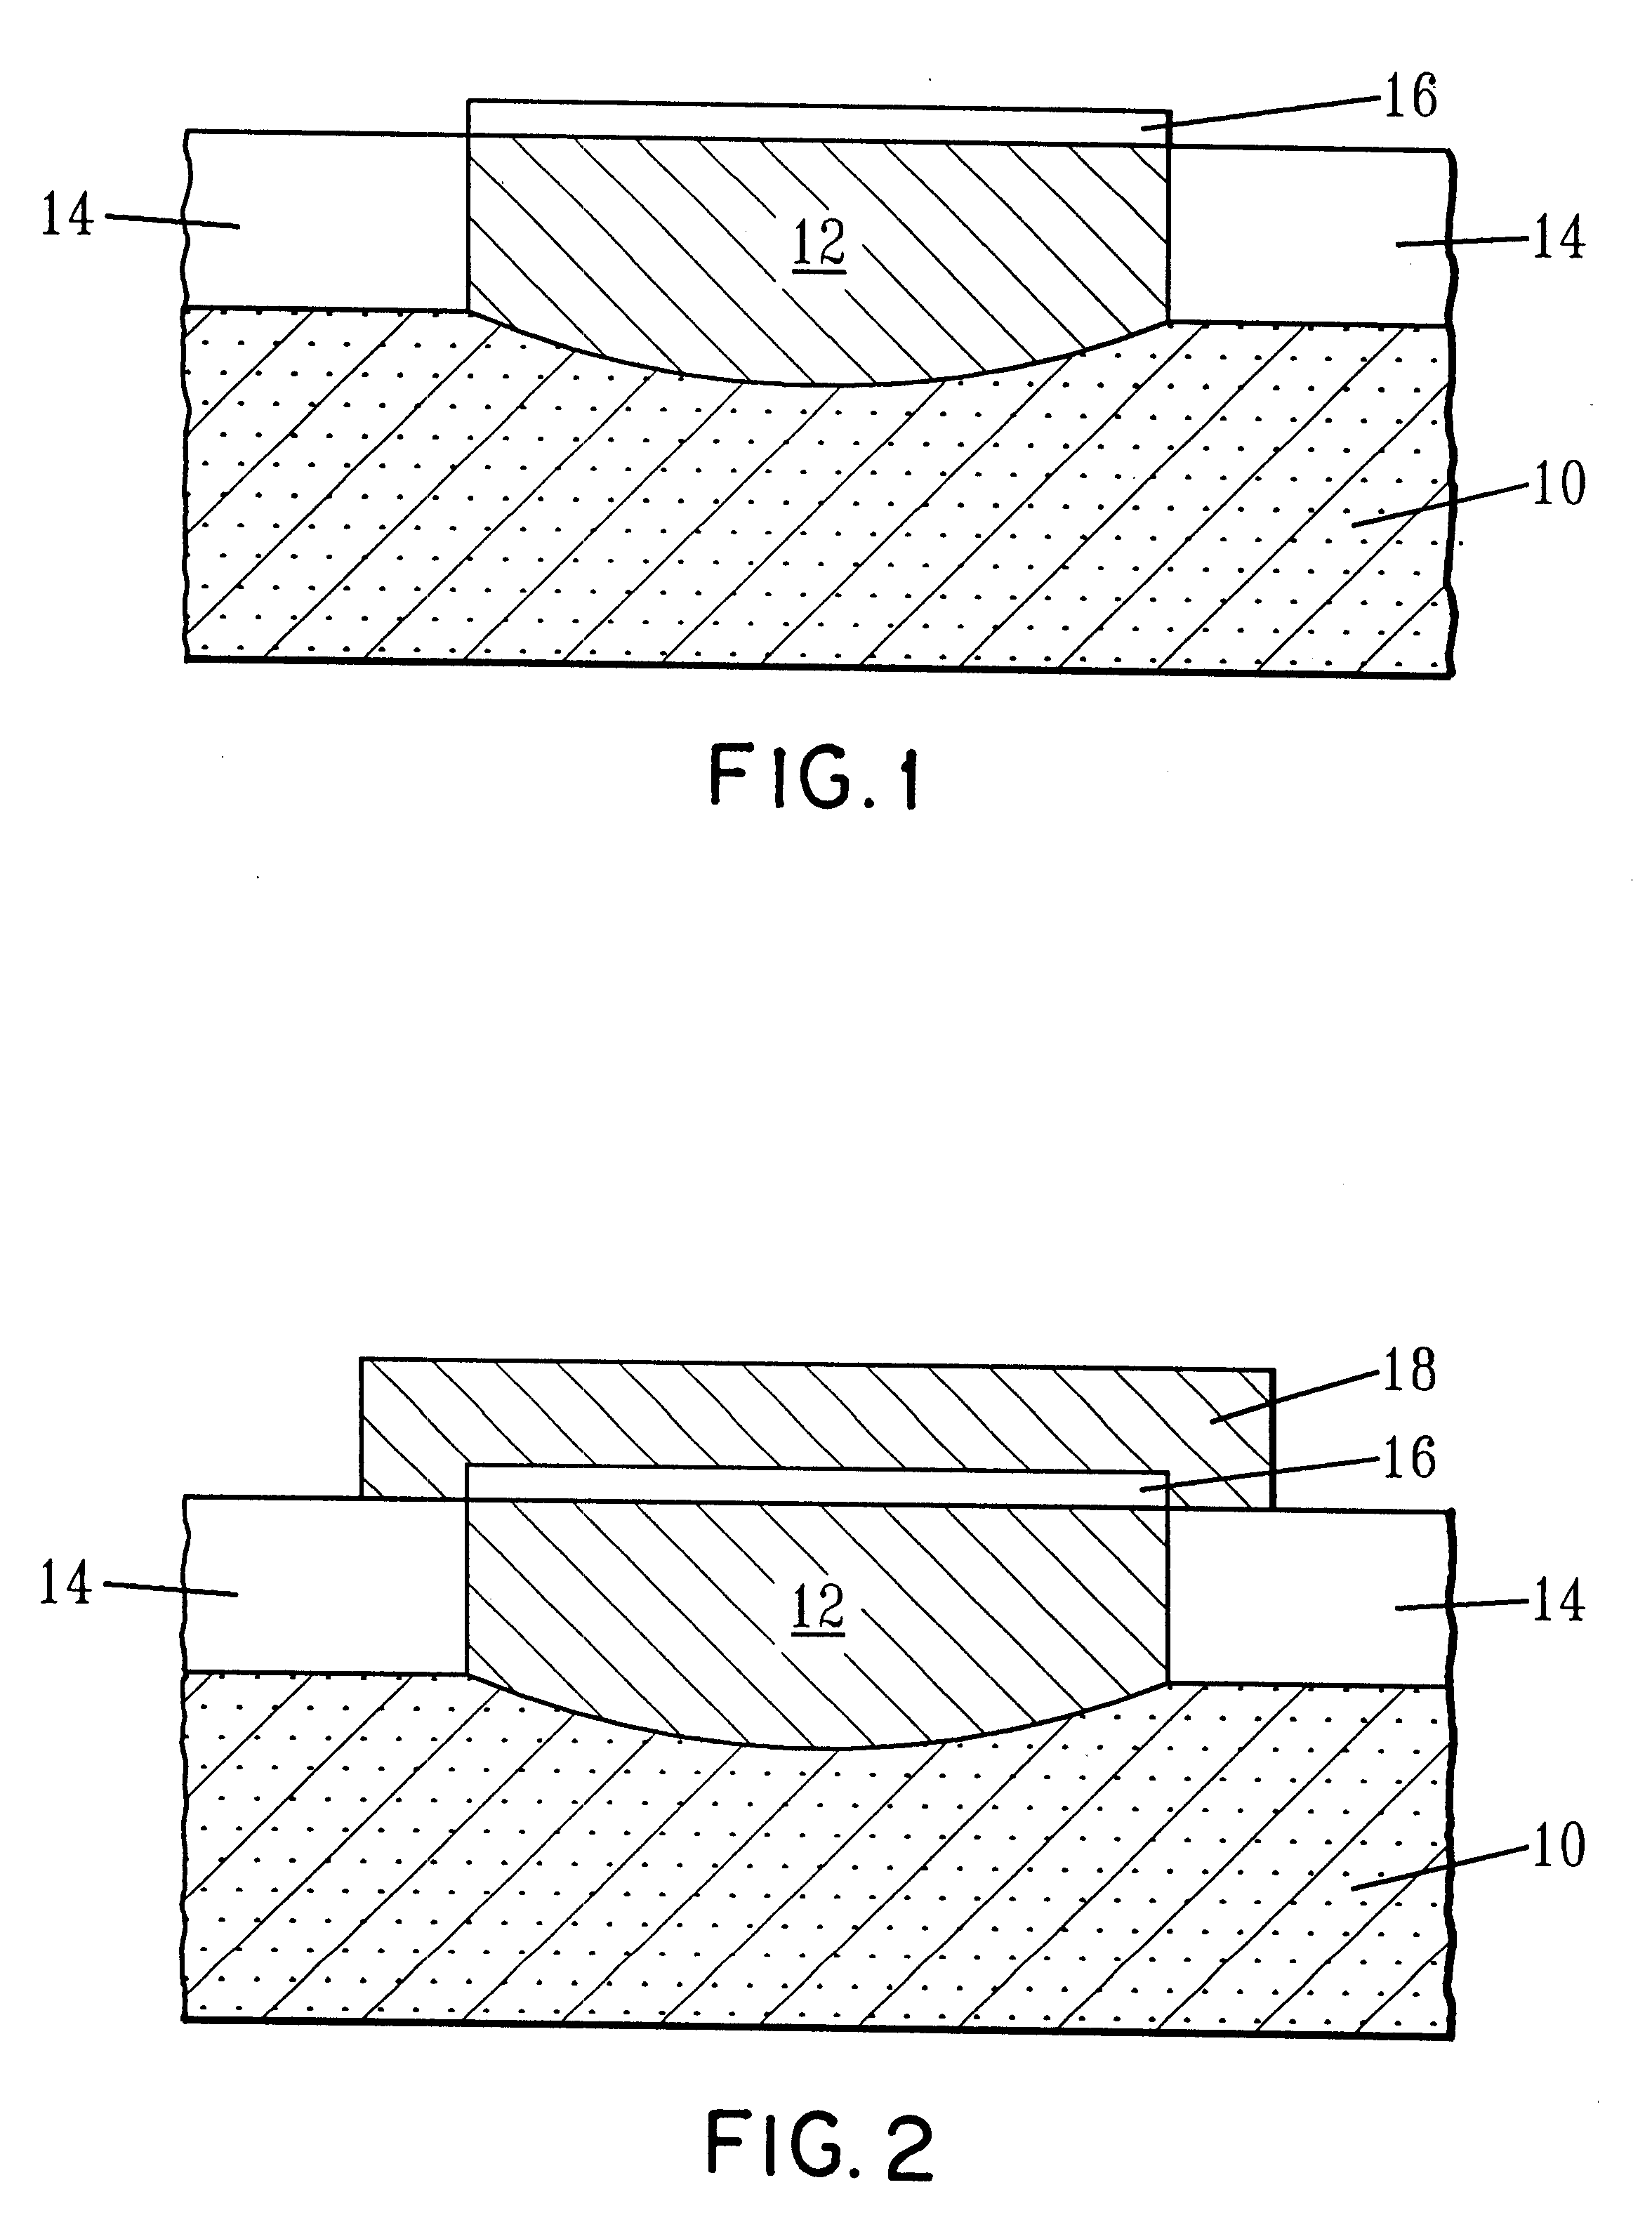 Poly-poly/MOS capacitor having a gate encapsulating first electrode layer